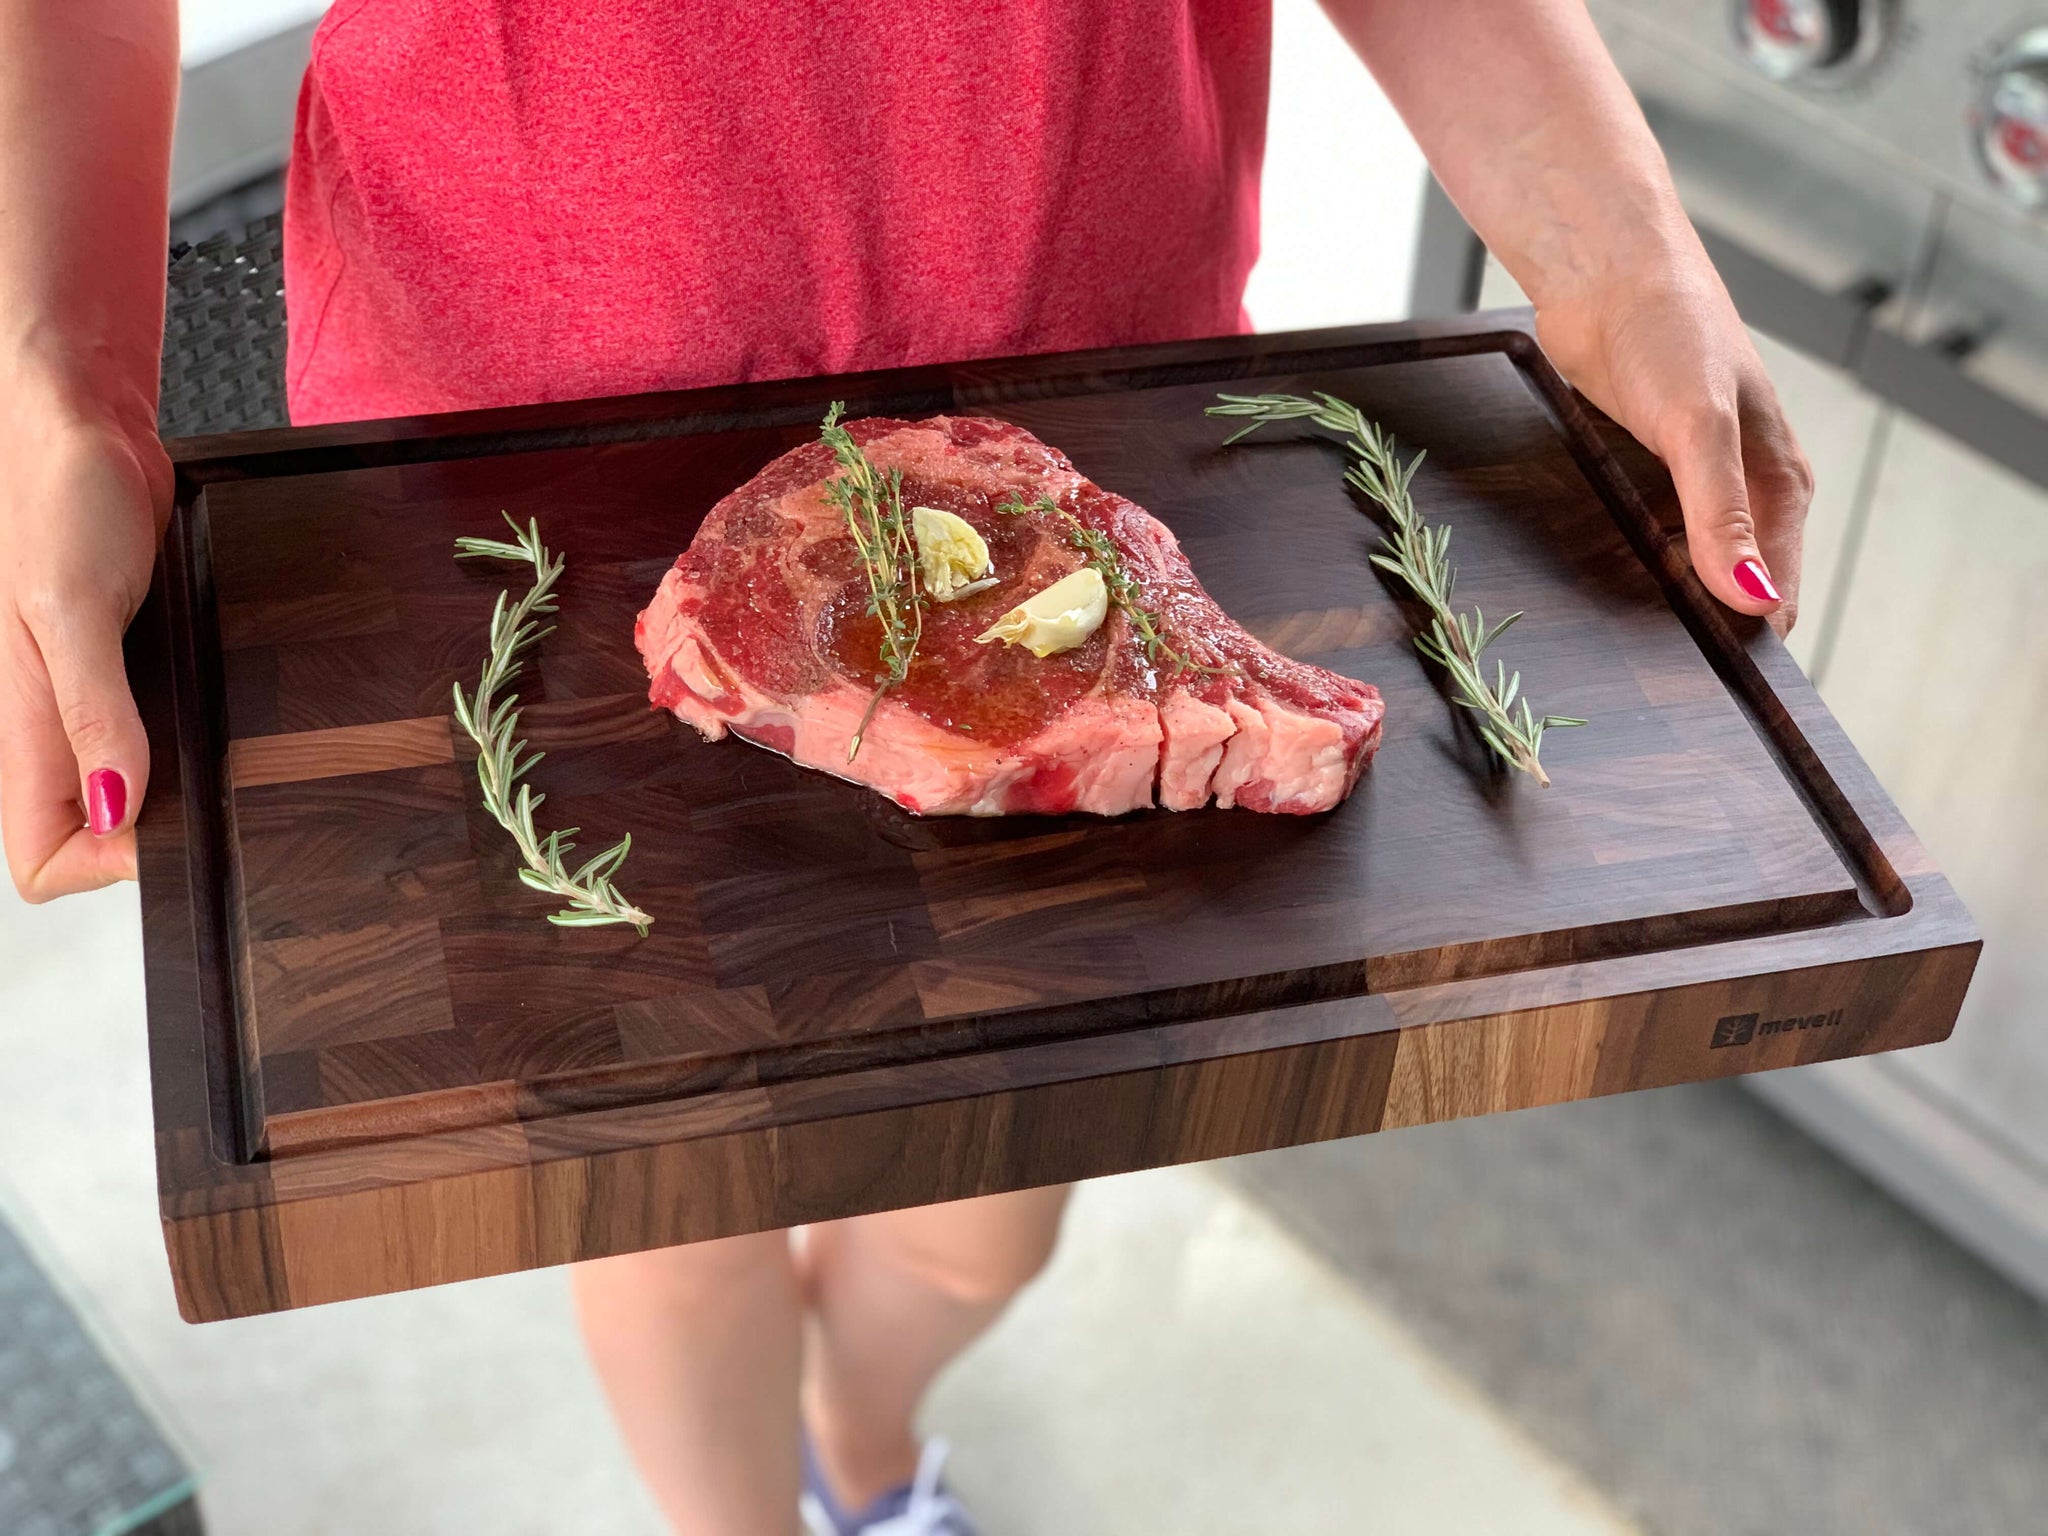 https://cdn.shopify.com/s/files/1/0018/1914/8399/files/What_Is_the_Best_Cutting_Board_for_Serving_Steak_2048x2048.jpg?v=1680511593